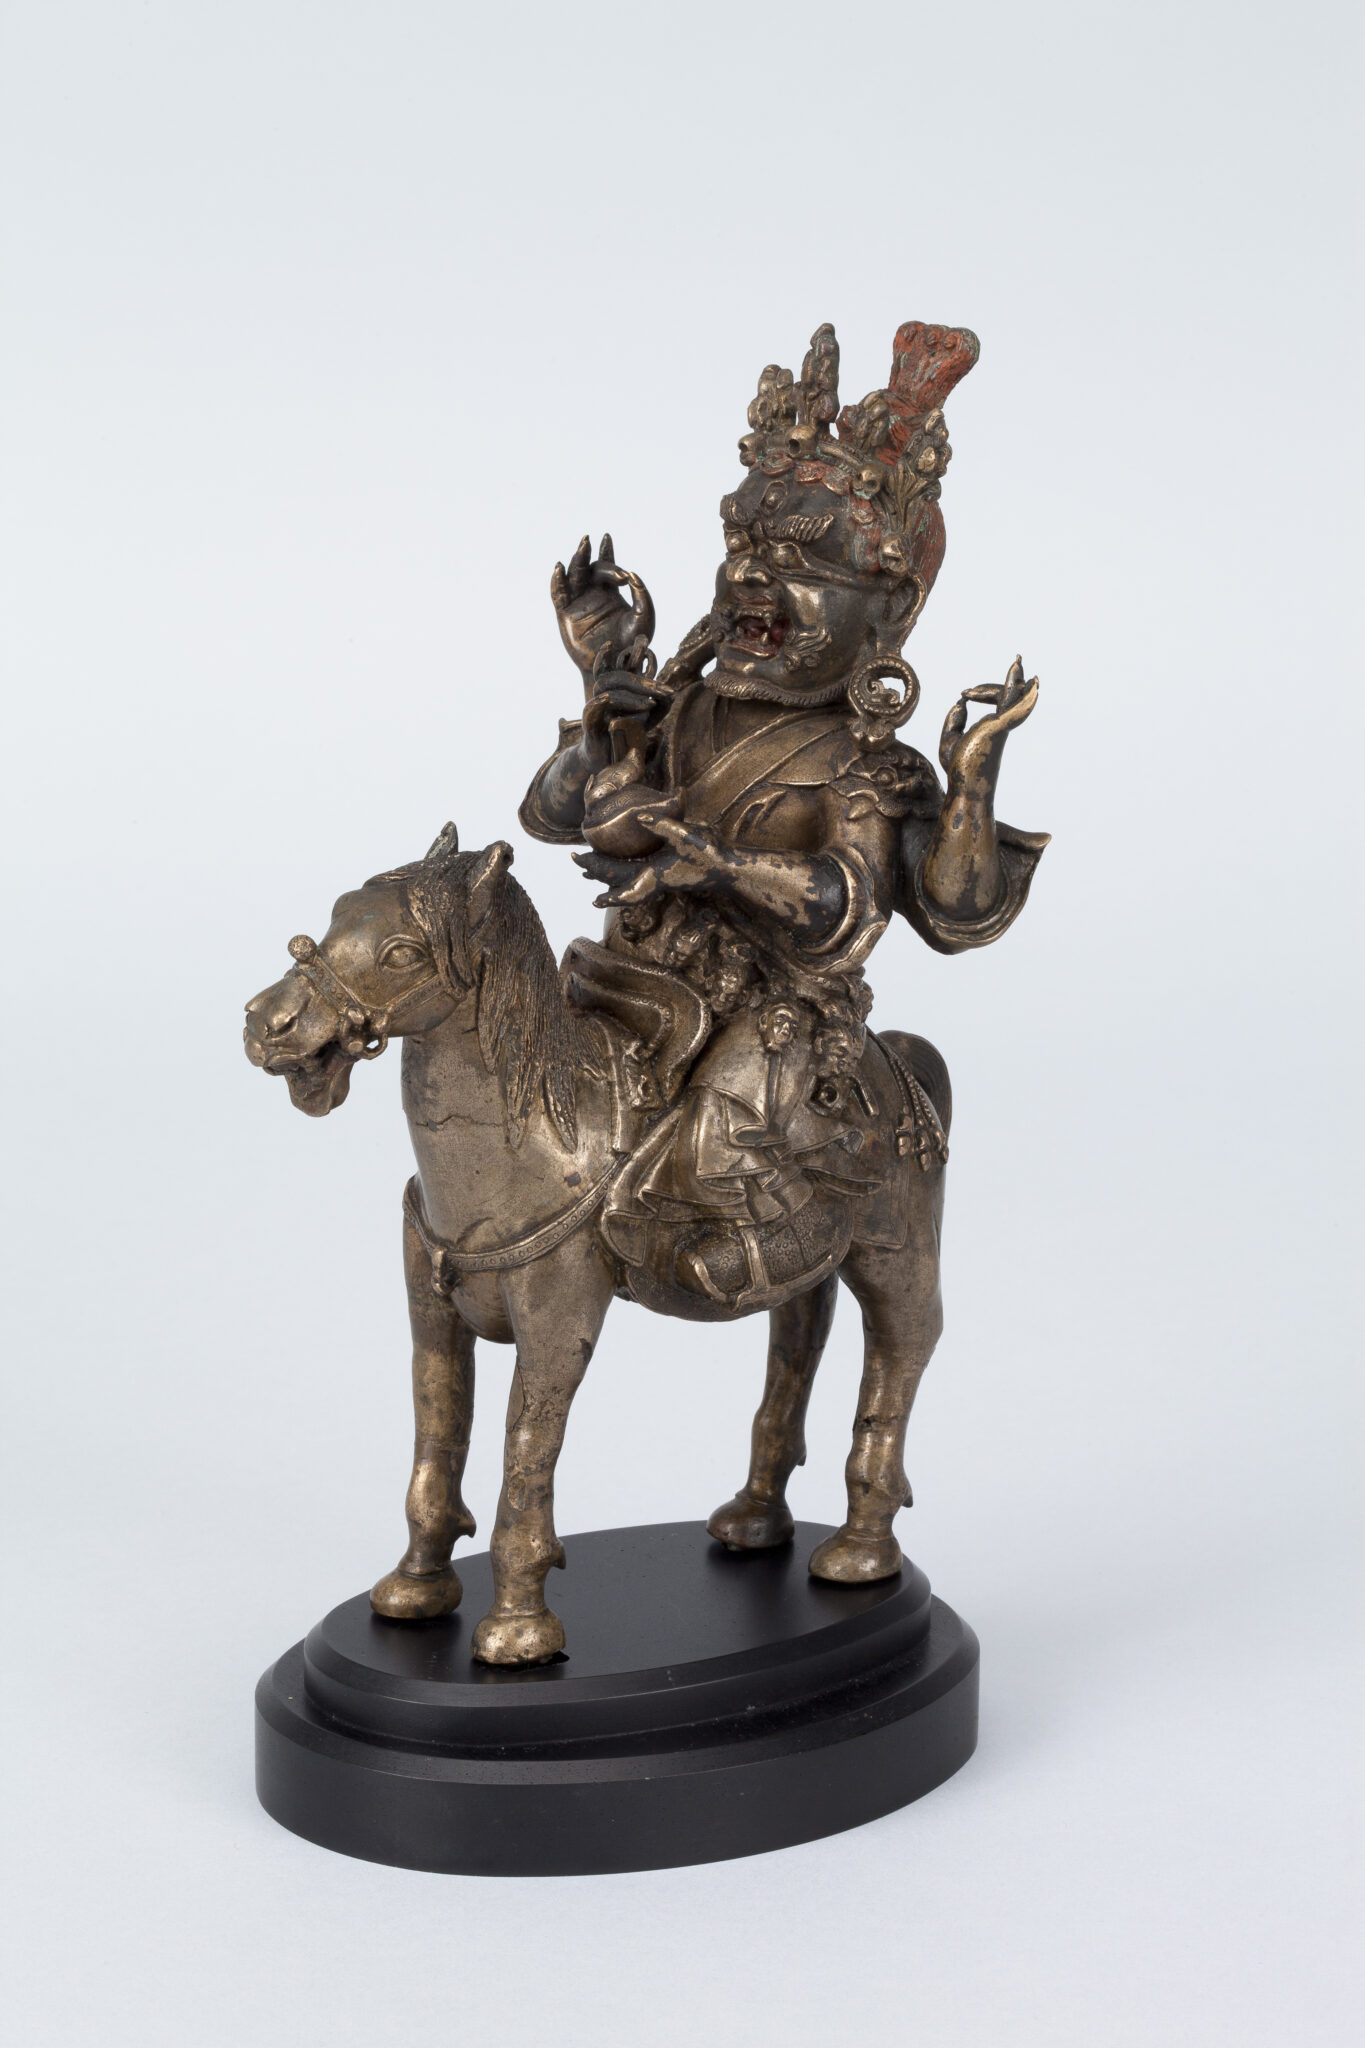 Brass-colored sculpture depicting four-armed wrathful deity with mouth open in grimace riding atop horse